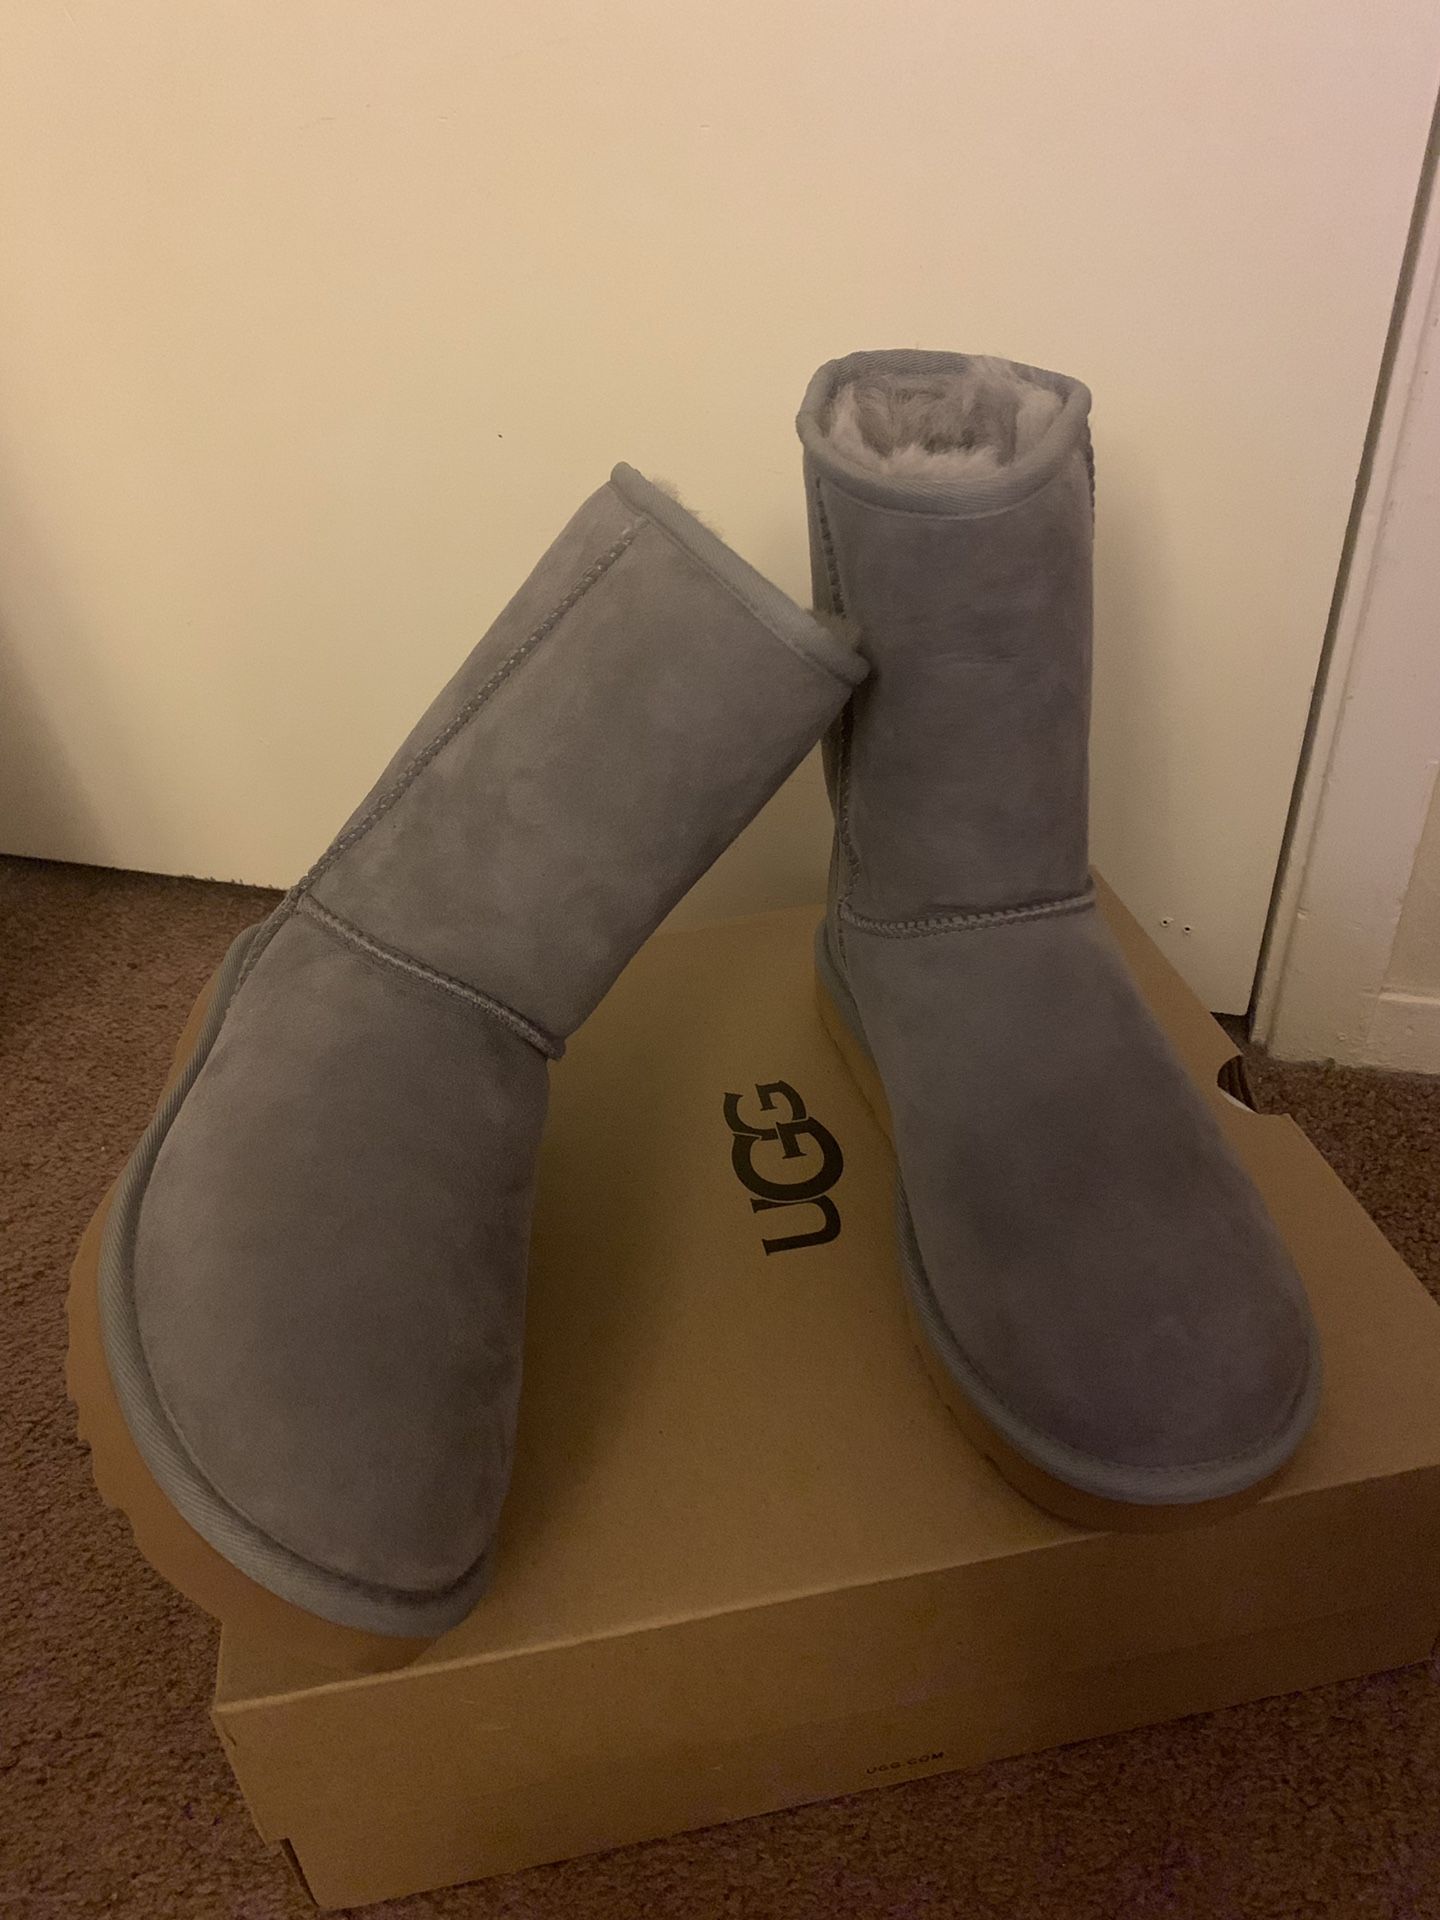 100% Authentic Brand New in Box UGG Classic Short Boots / Women size 5, 6, 7, 8 / Color: Soft Amthyst